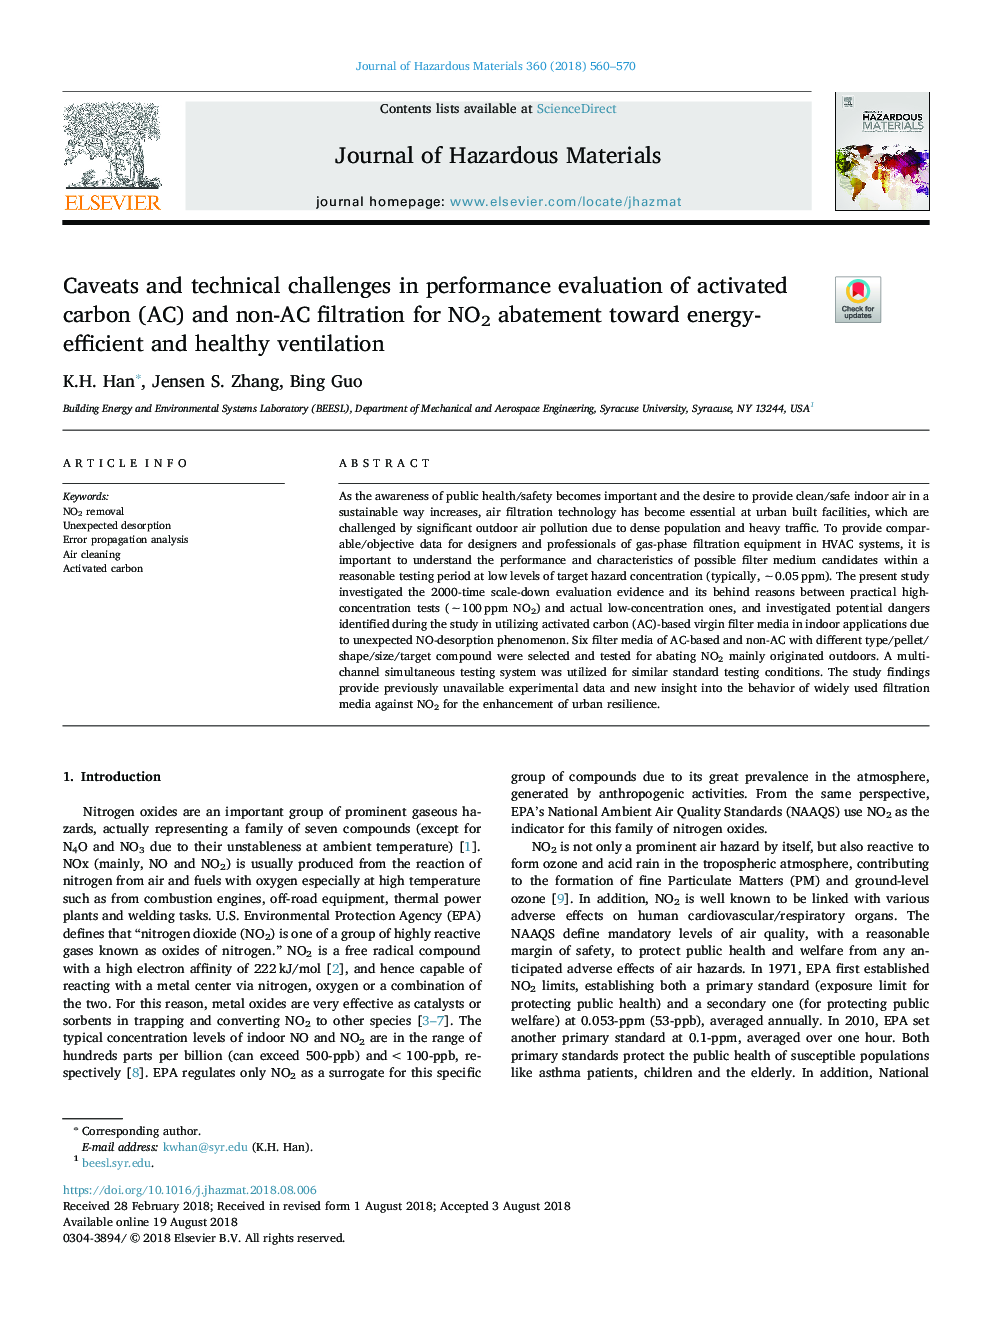 Caveats and technical challenges in performance evaluation of activated carbon (AC) and non-AC filtration for NO2 abatement toward energy-efficient and healthy ventilation